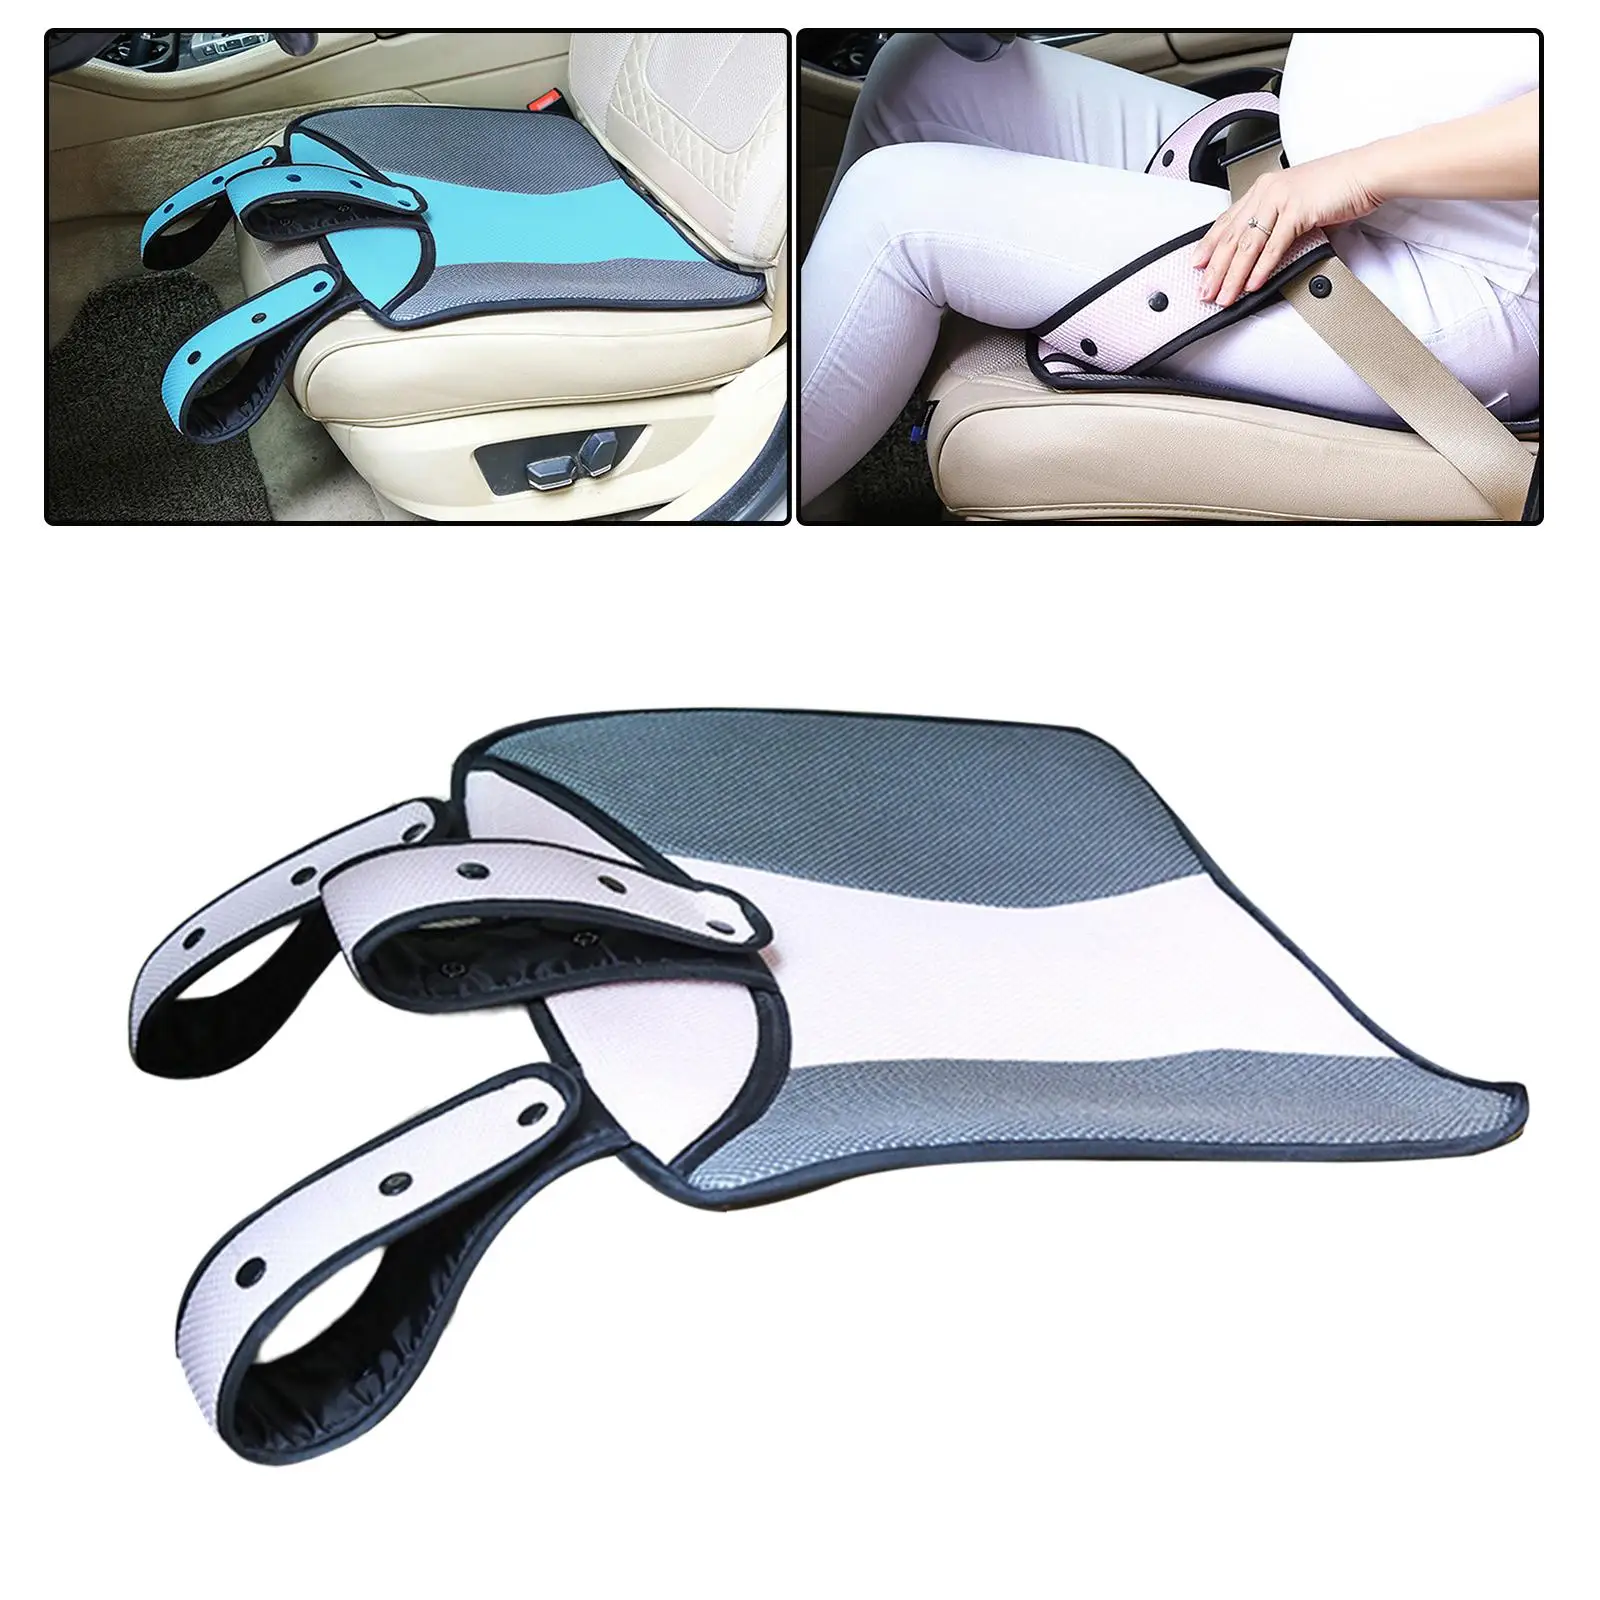 Maternity Car Adjuster Cushion Breathable Comfortable Soft Seat Belt Strap Seat Cover for Moms